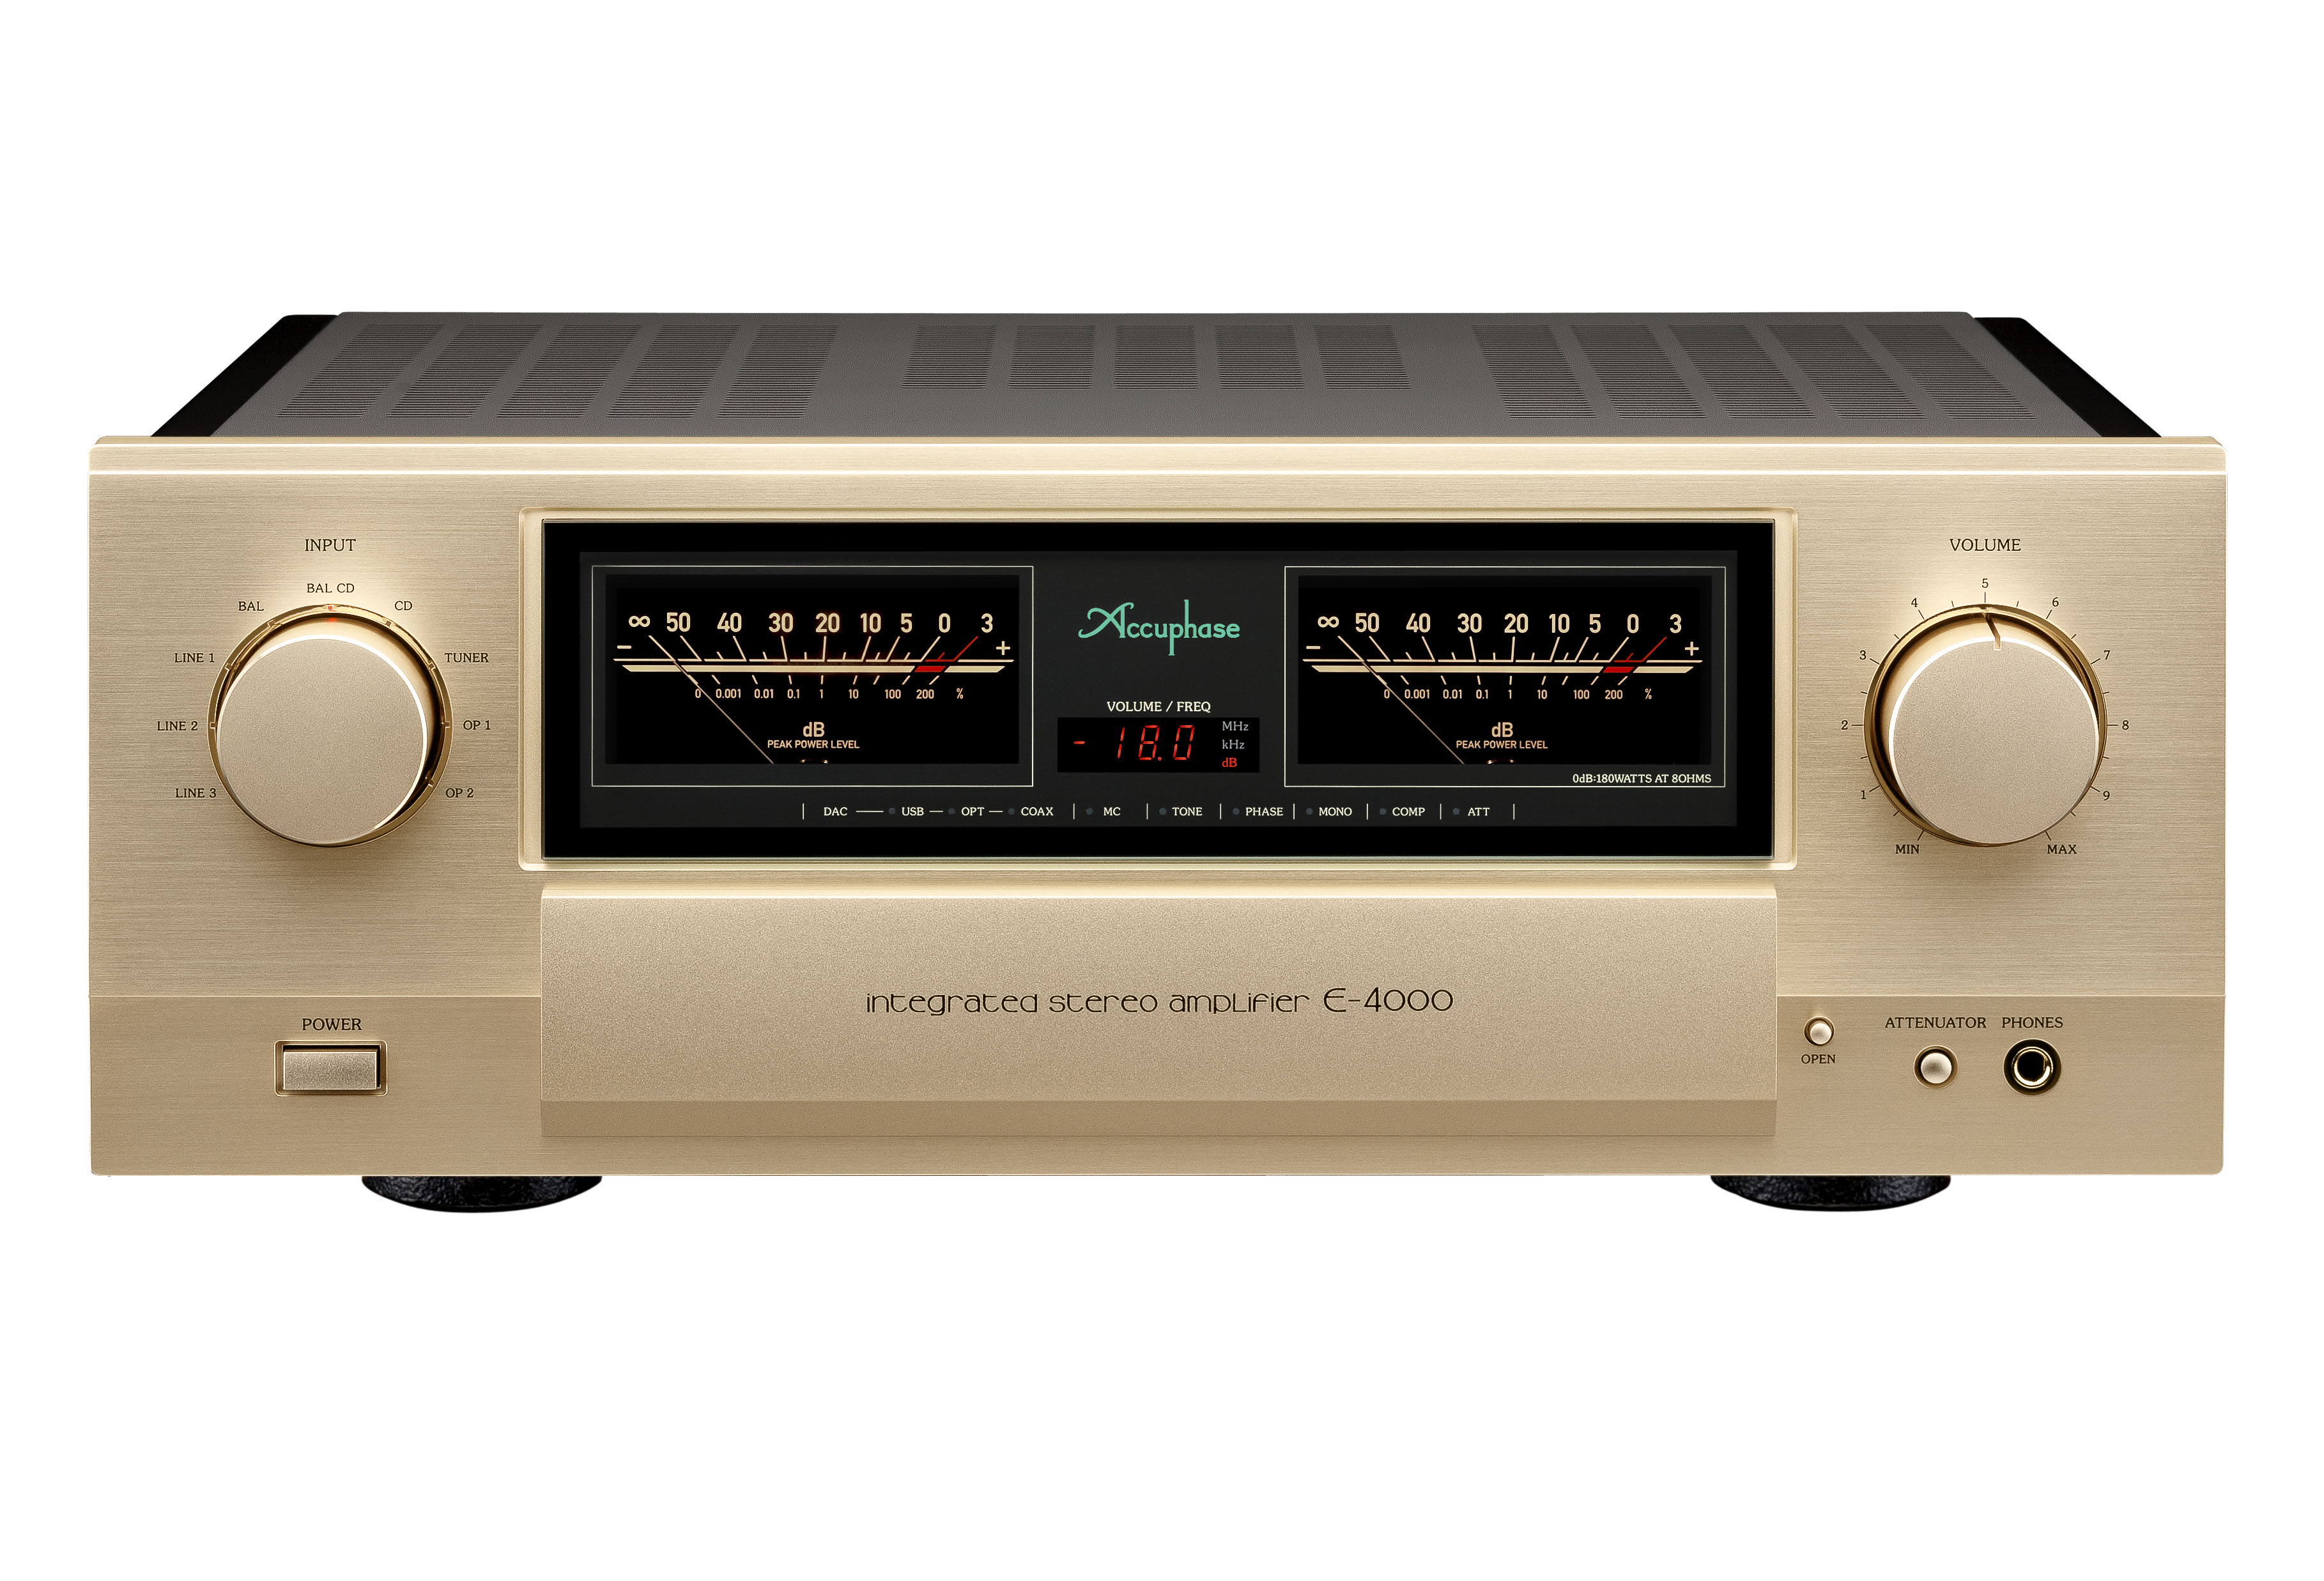 Accuphase E-4000 (120x80)